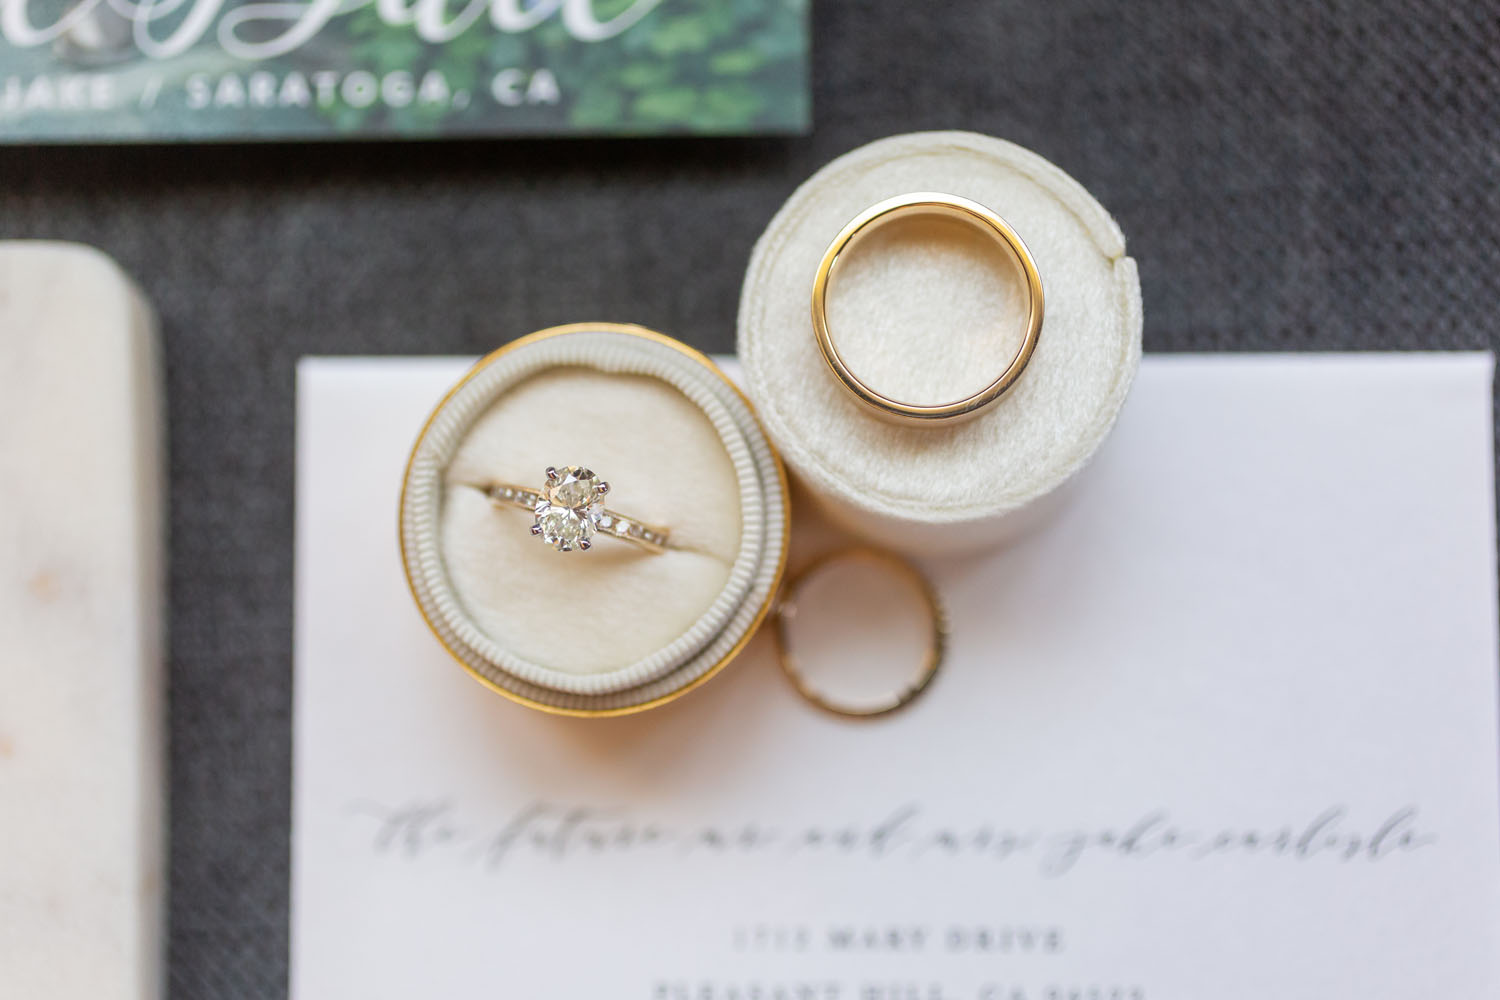 detail shot of wedding rings on top of invitation